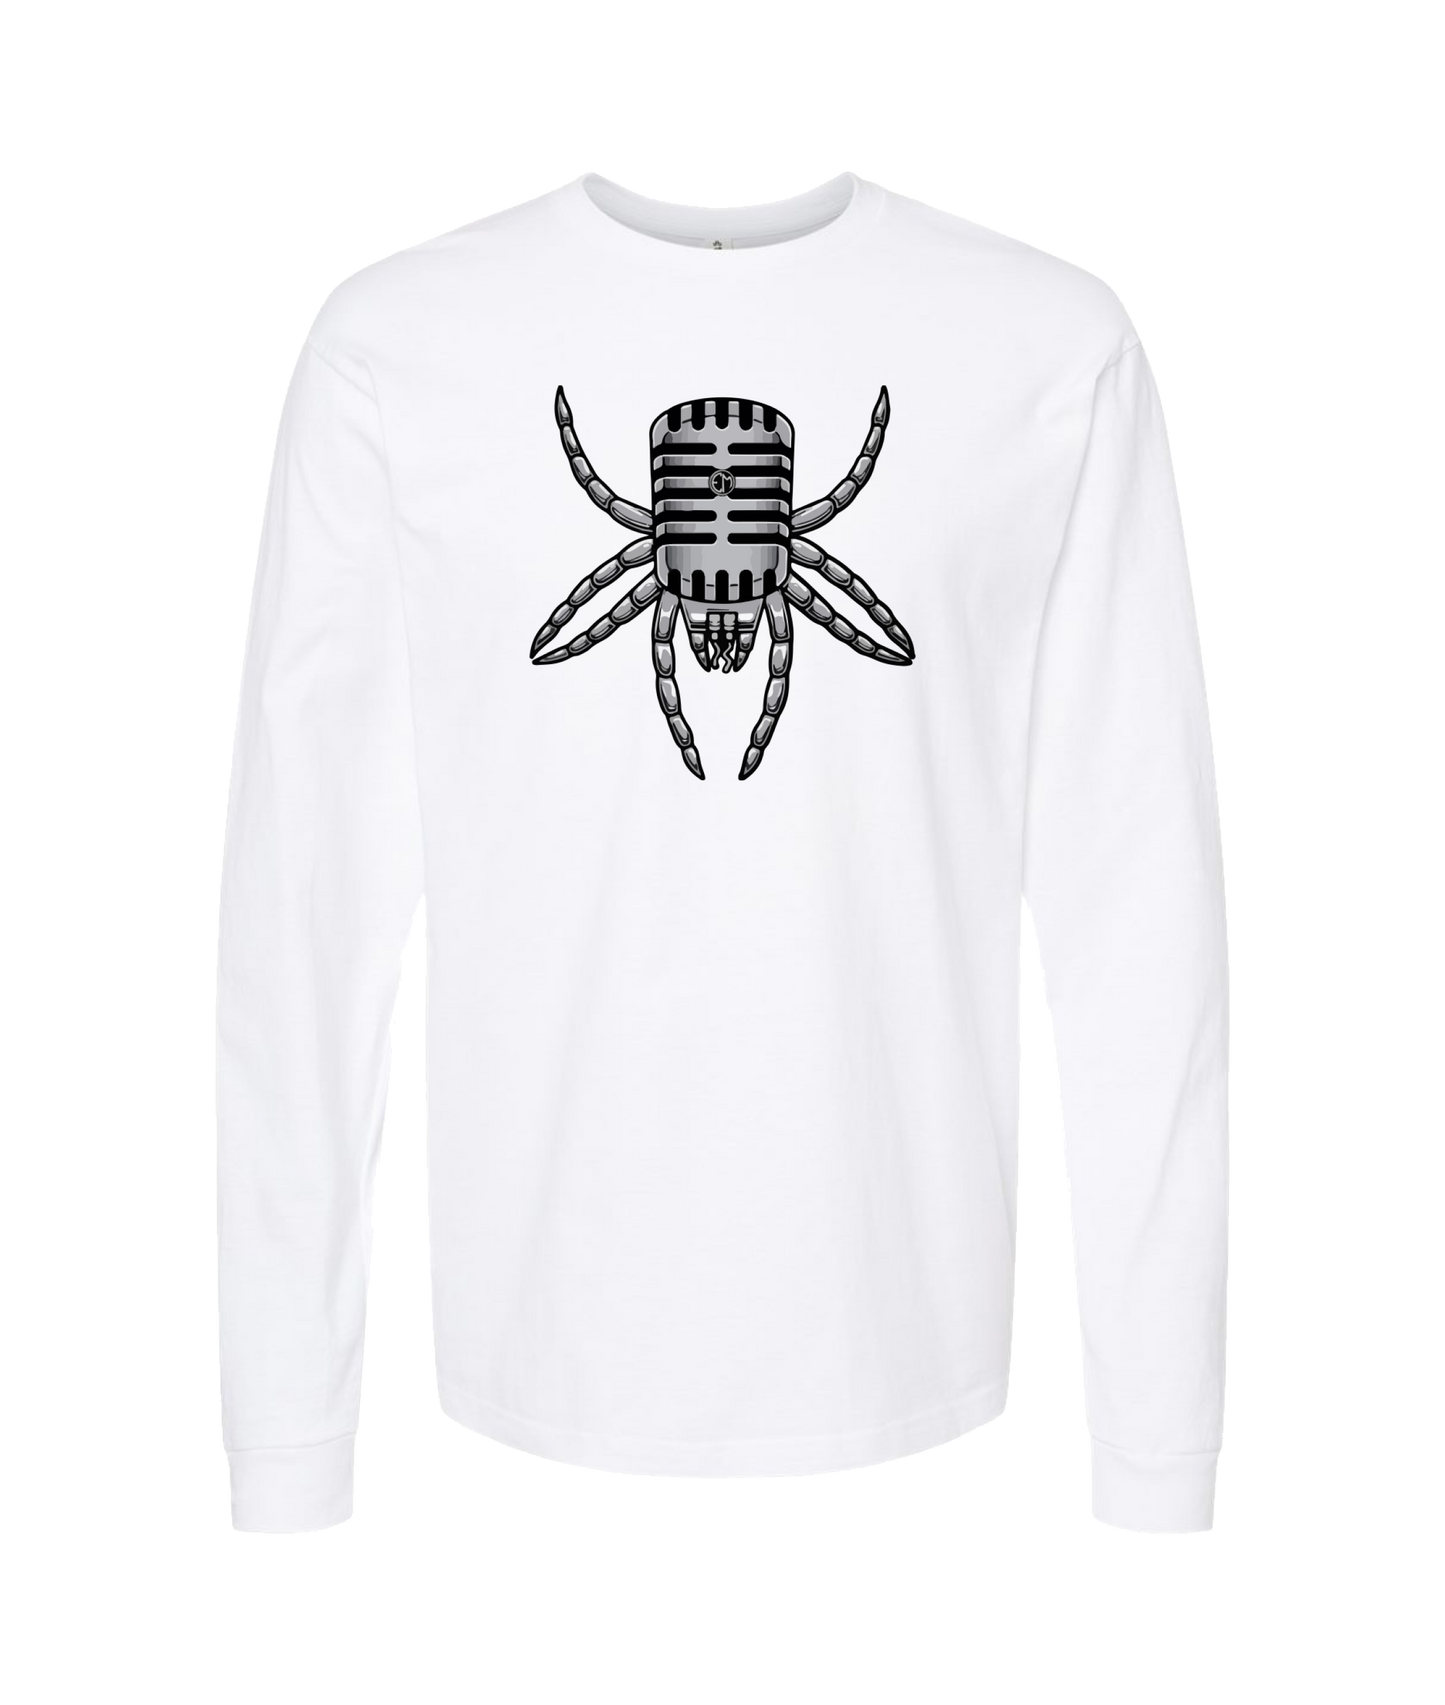 The Ear Mites - Mite - White Long Sleeve T